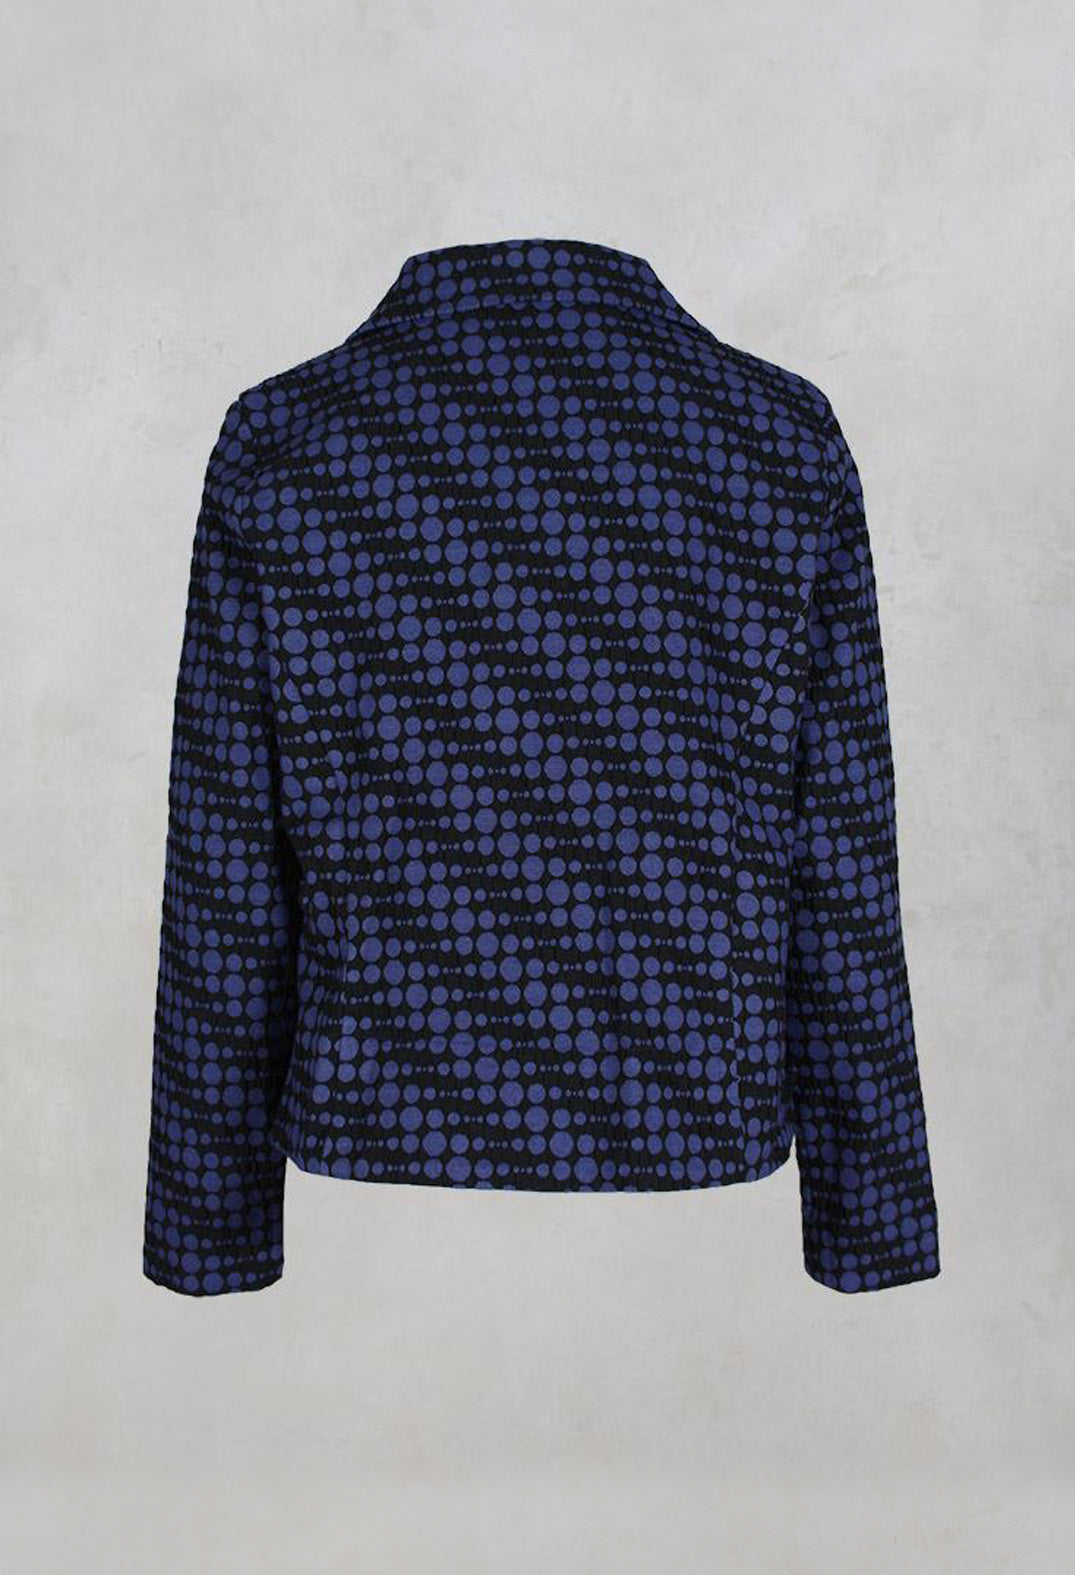 Spotty Jacquard Short Jacket with Button Front in Blueberry